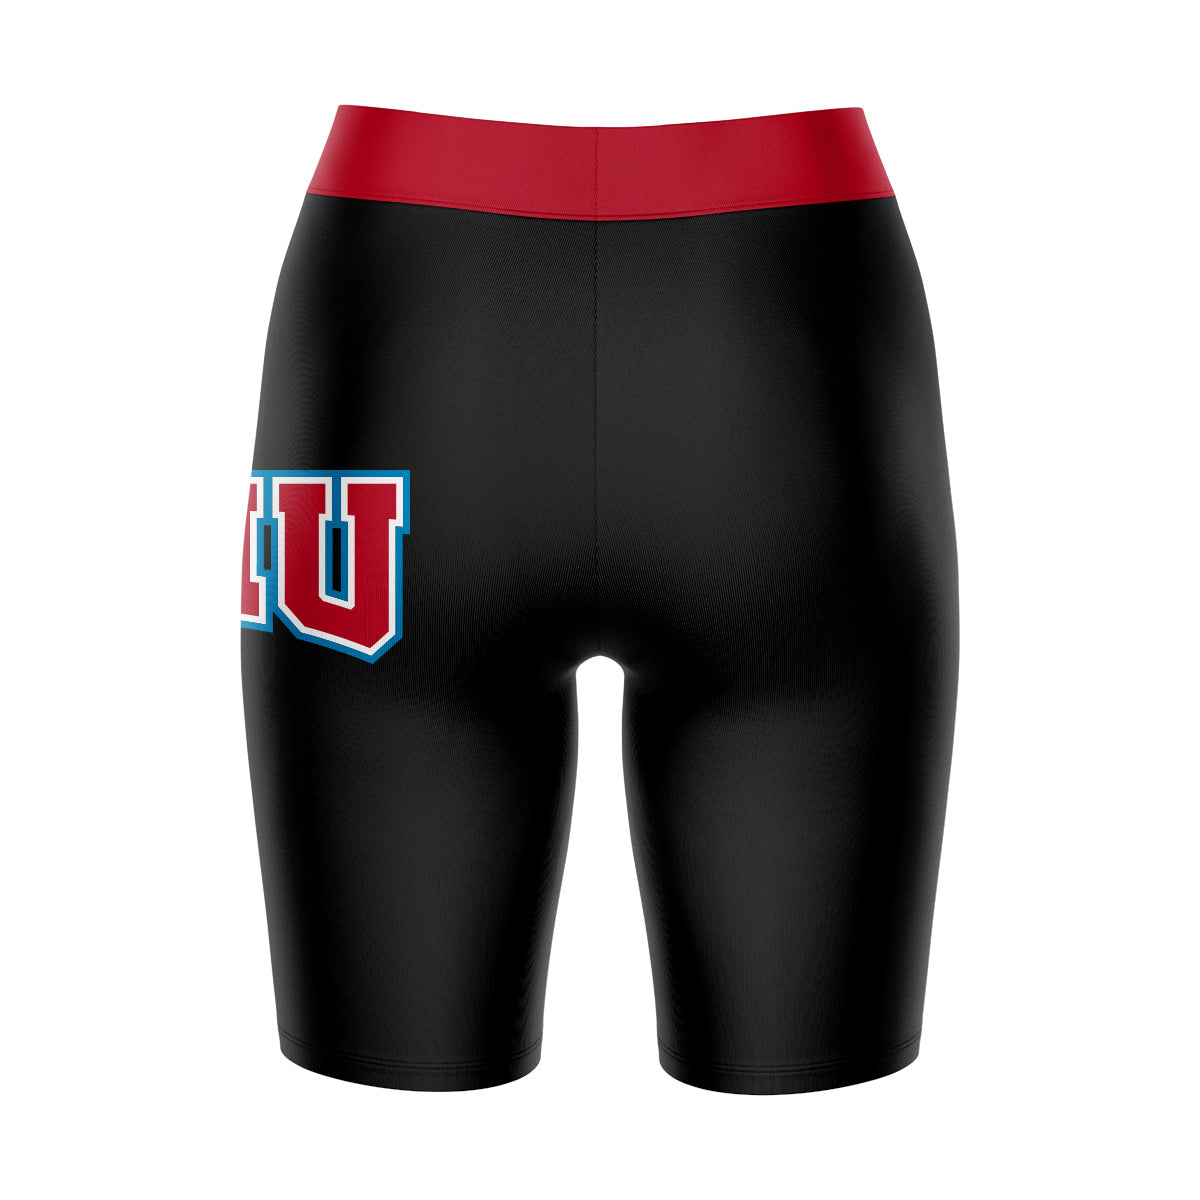 LMU Lions Vive La Fete Game Day Logo on Thigh and Waistband Black and Maroon Women Bike Short 9 Inseam"